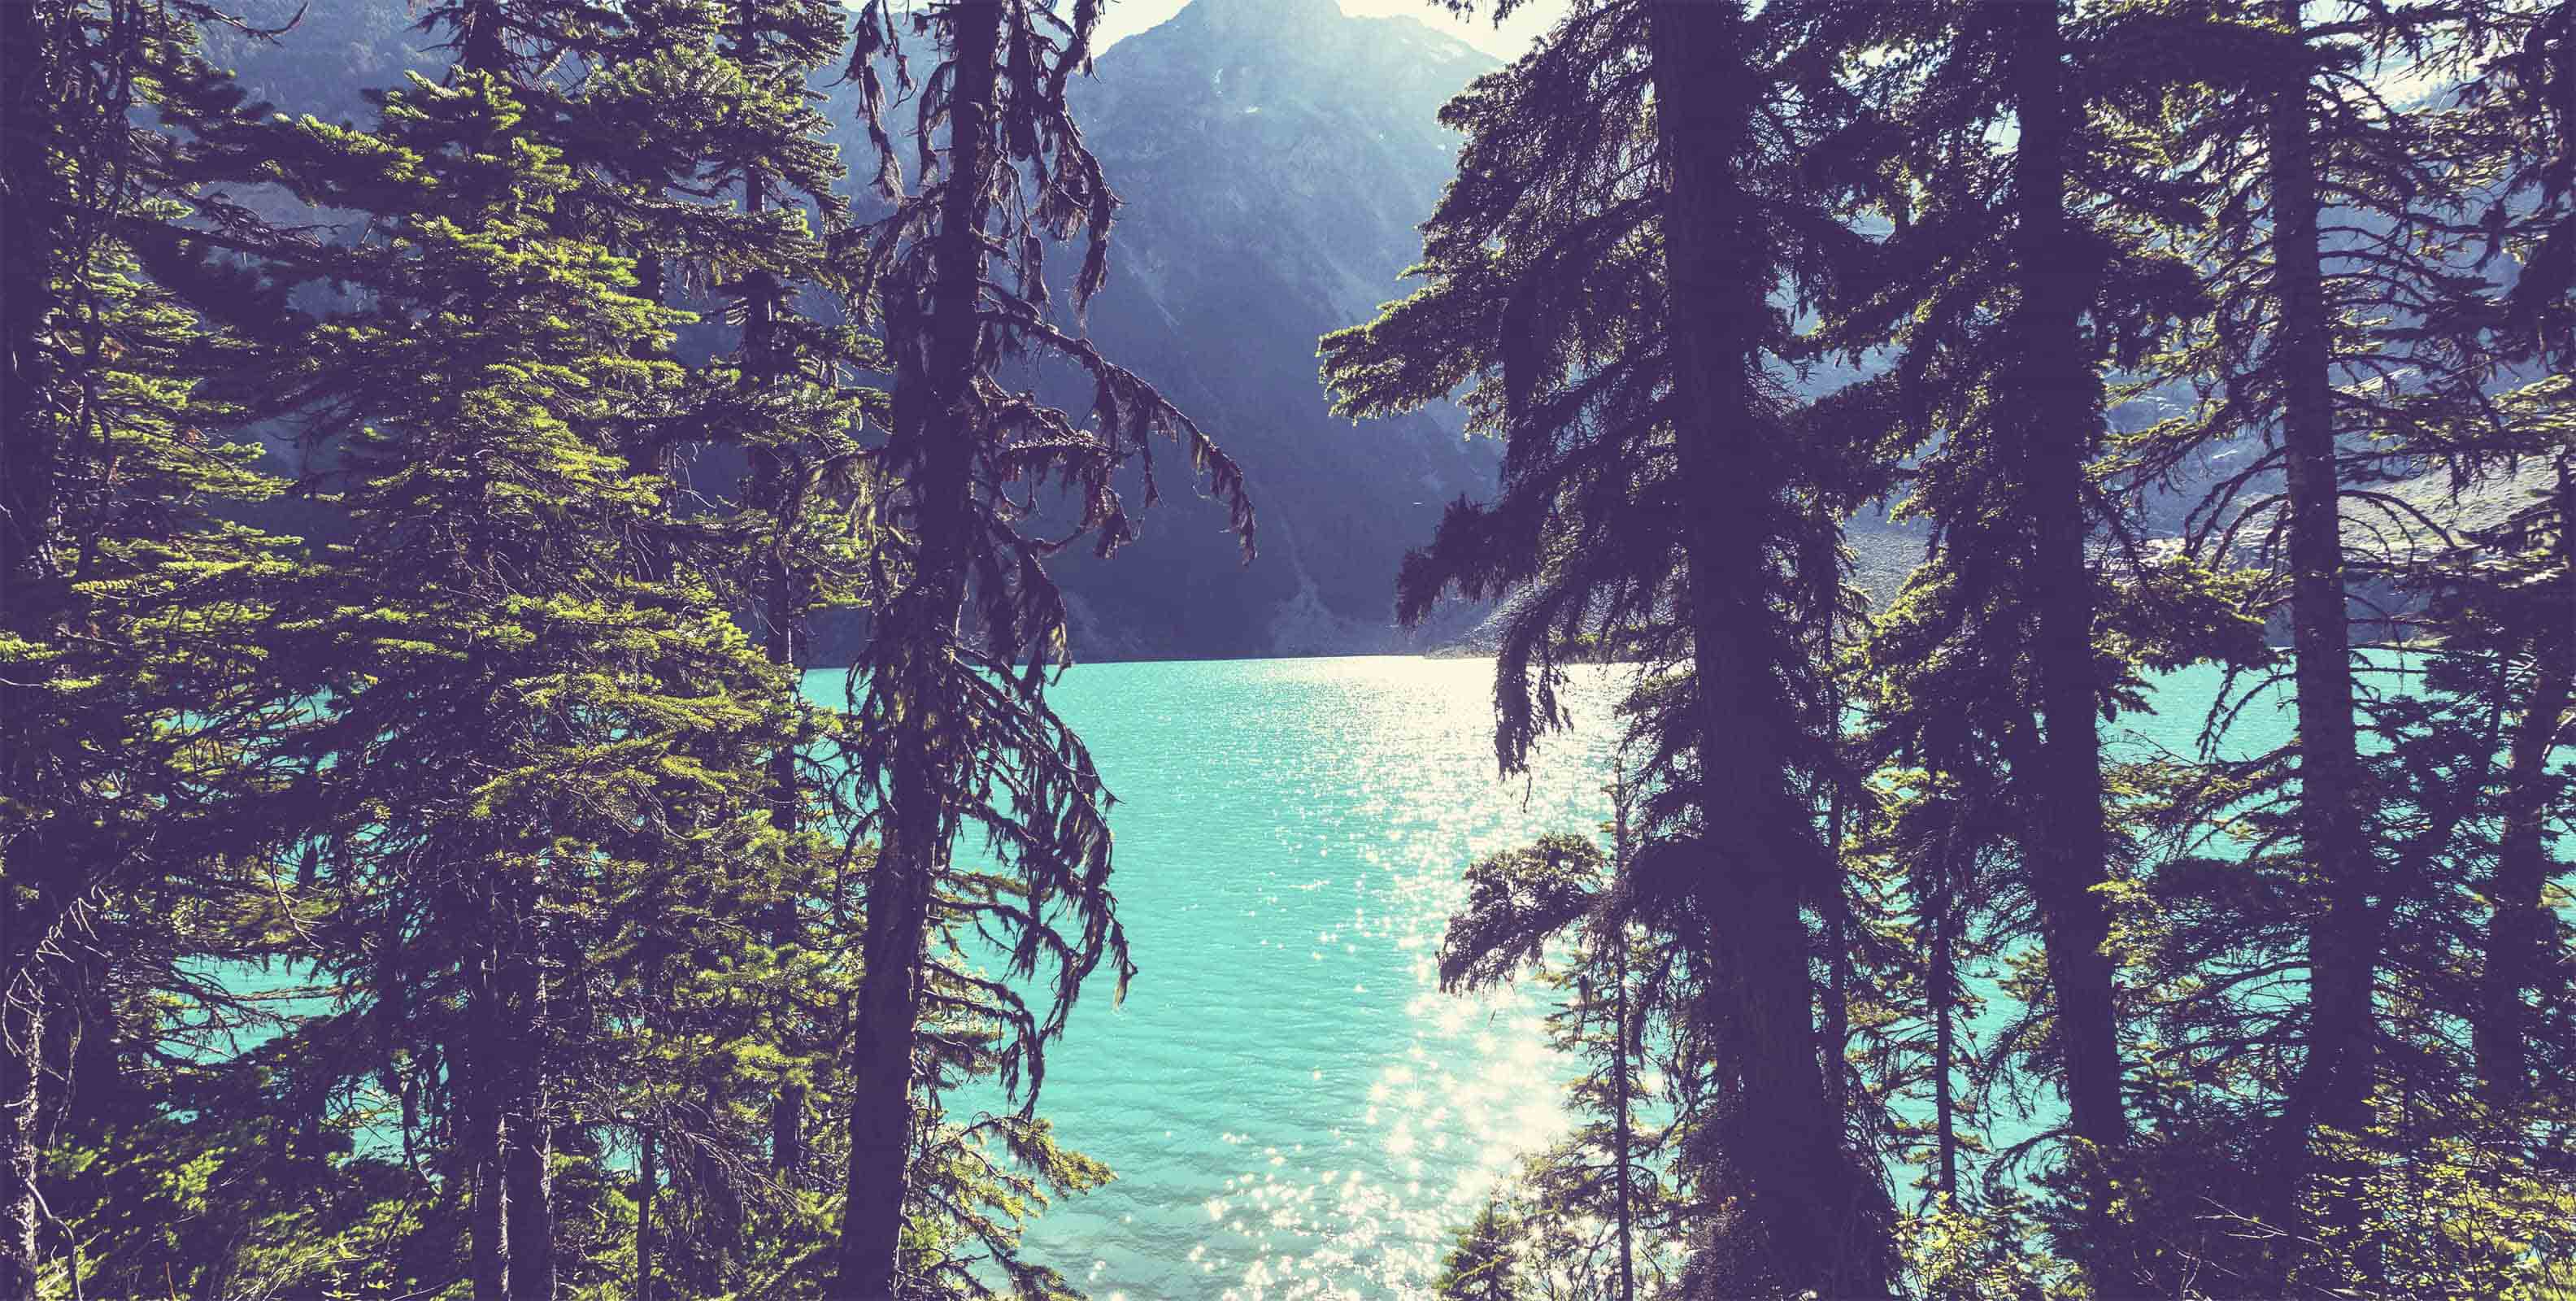 Lake Joffre Through the Trees Wall Mural by Walls Need Love®